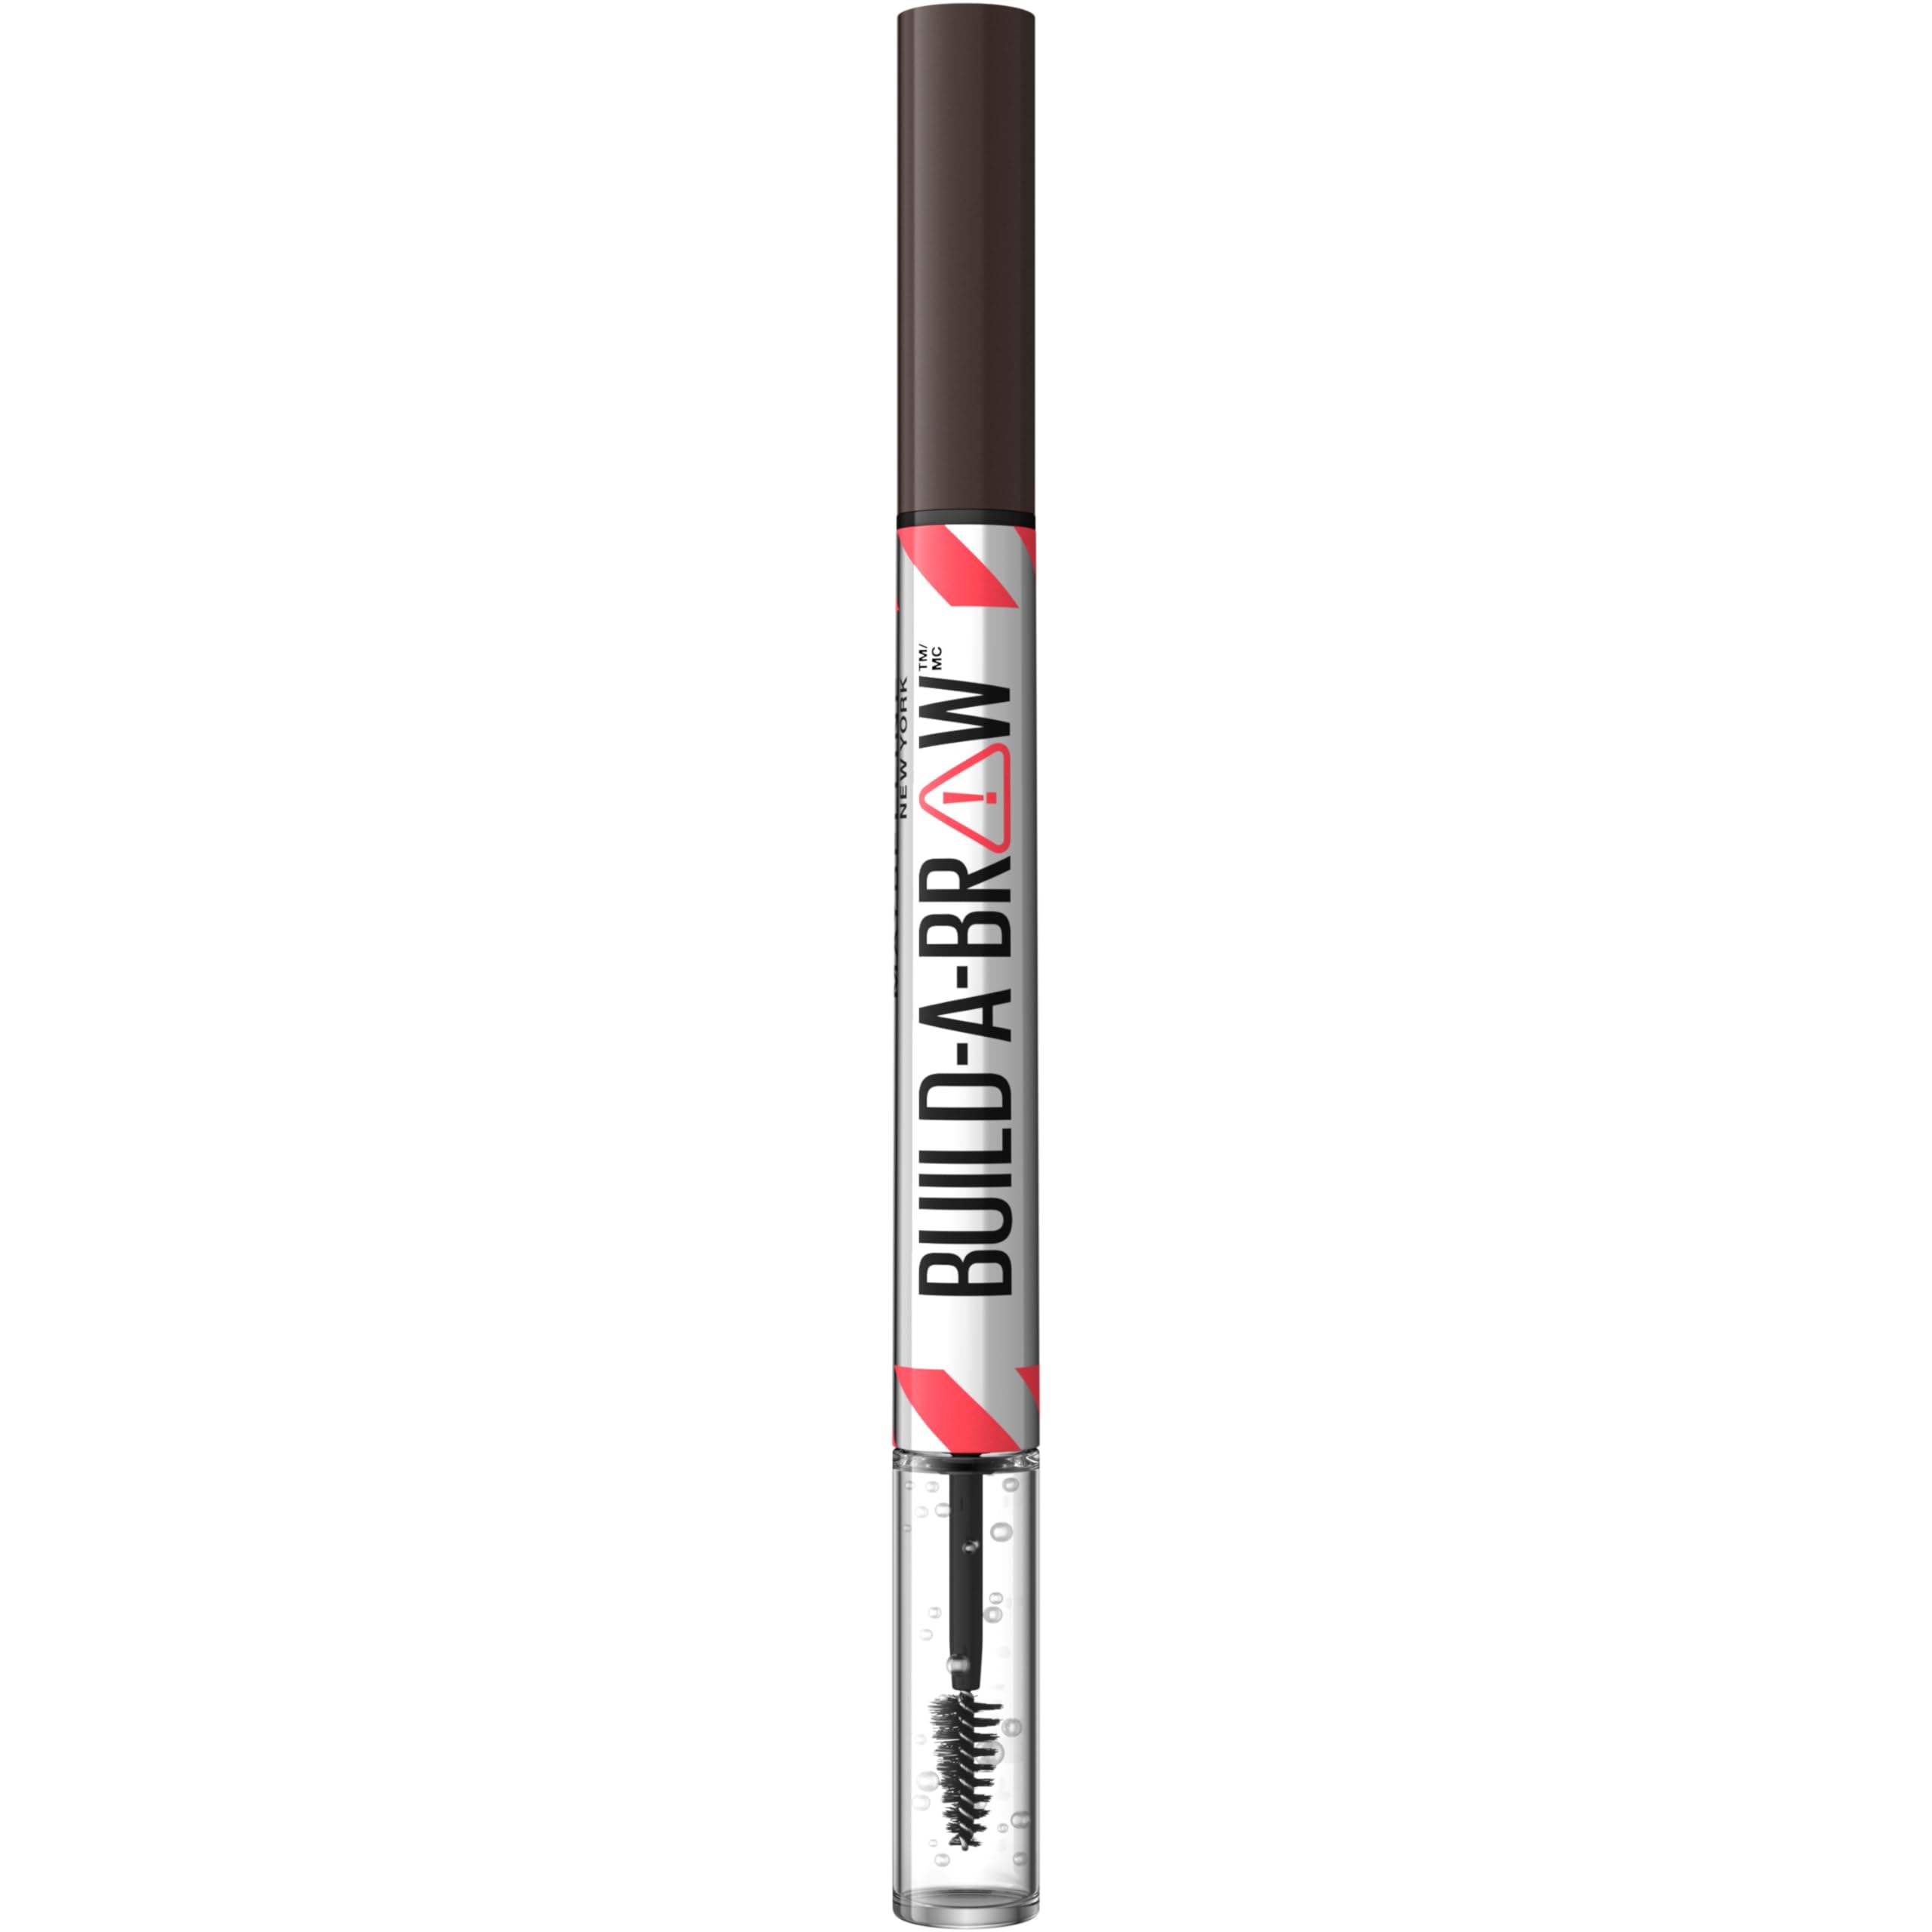 Maybelline Build-A-Brow 2-in-1 Brow Pen and Sealing Brow Gel, Eyebrow Makeup for Real-Looking, Fuller Eyebrows, Ash Brown, 1 Count